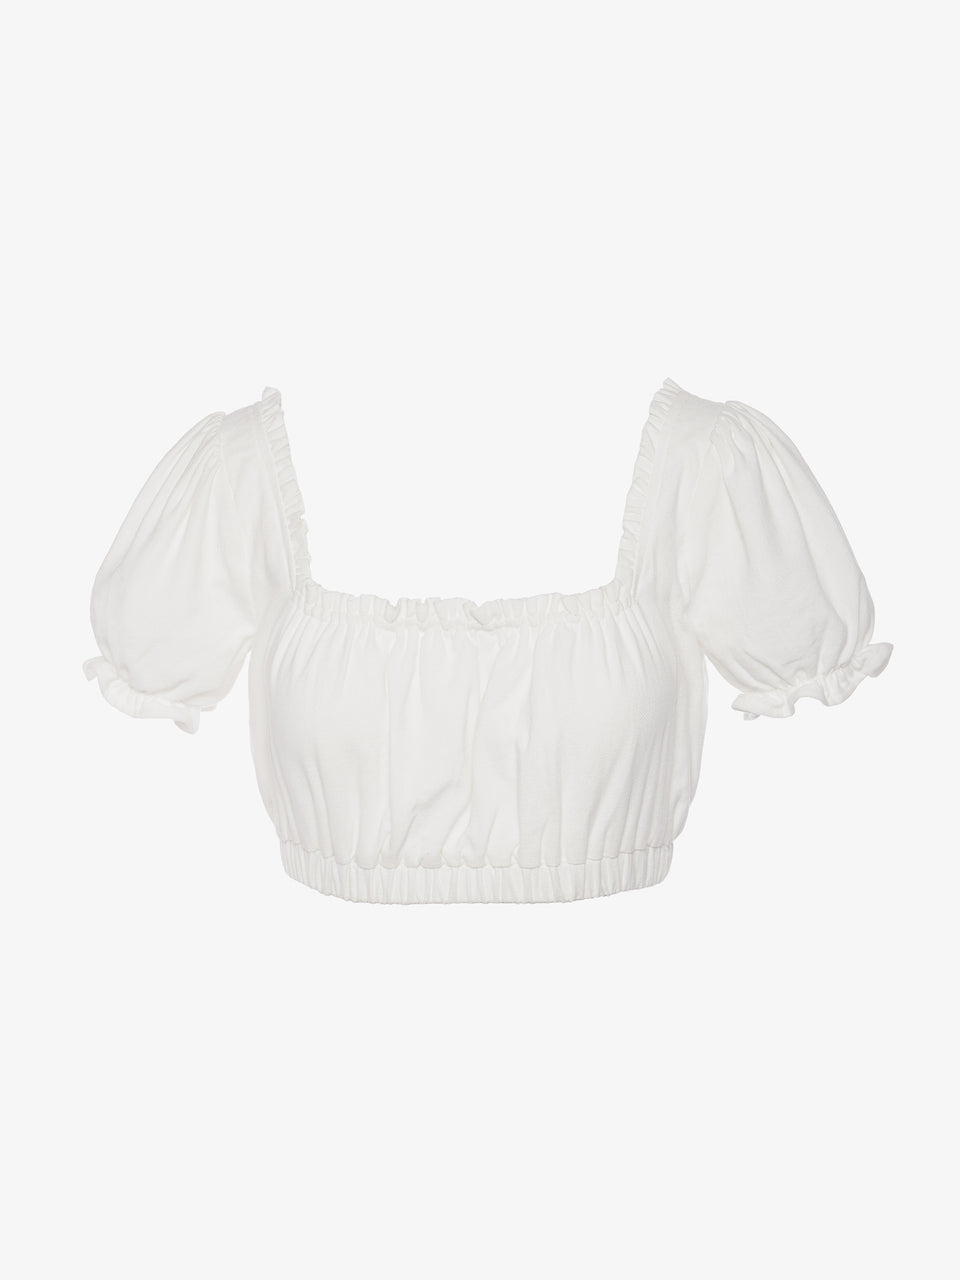 Lani_The_Label_Blossom_Crop_Top_Ivory